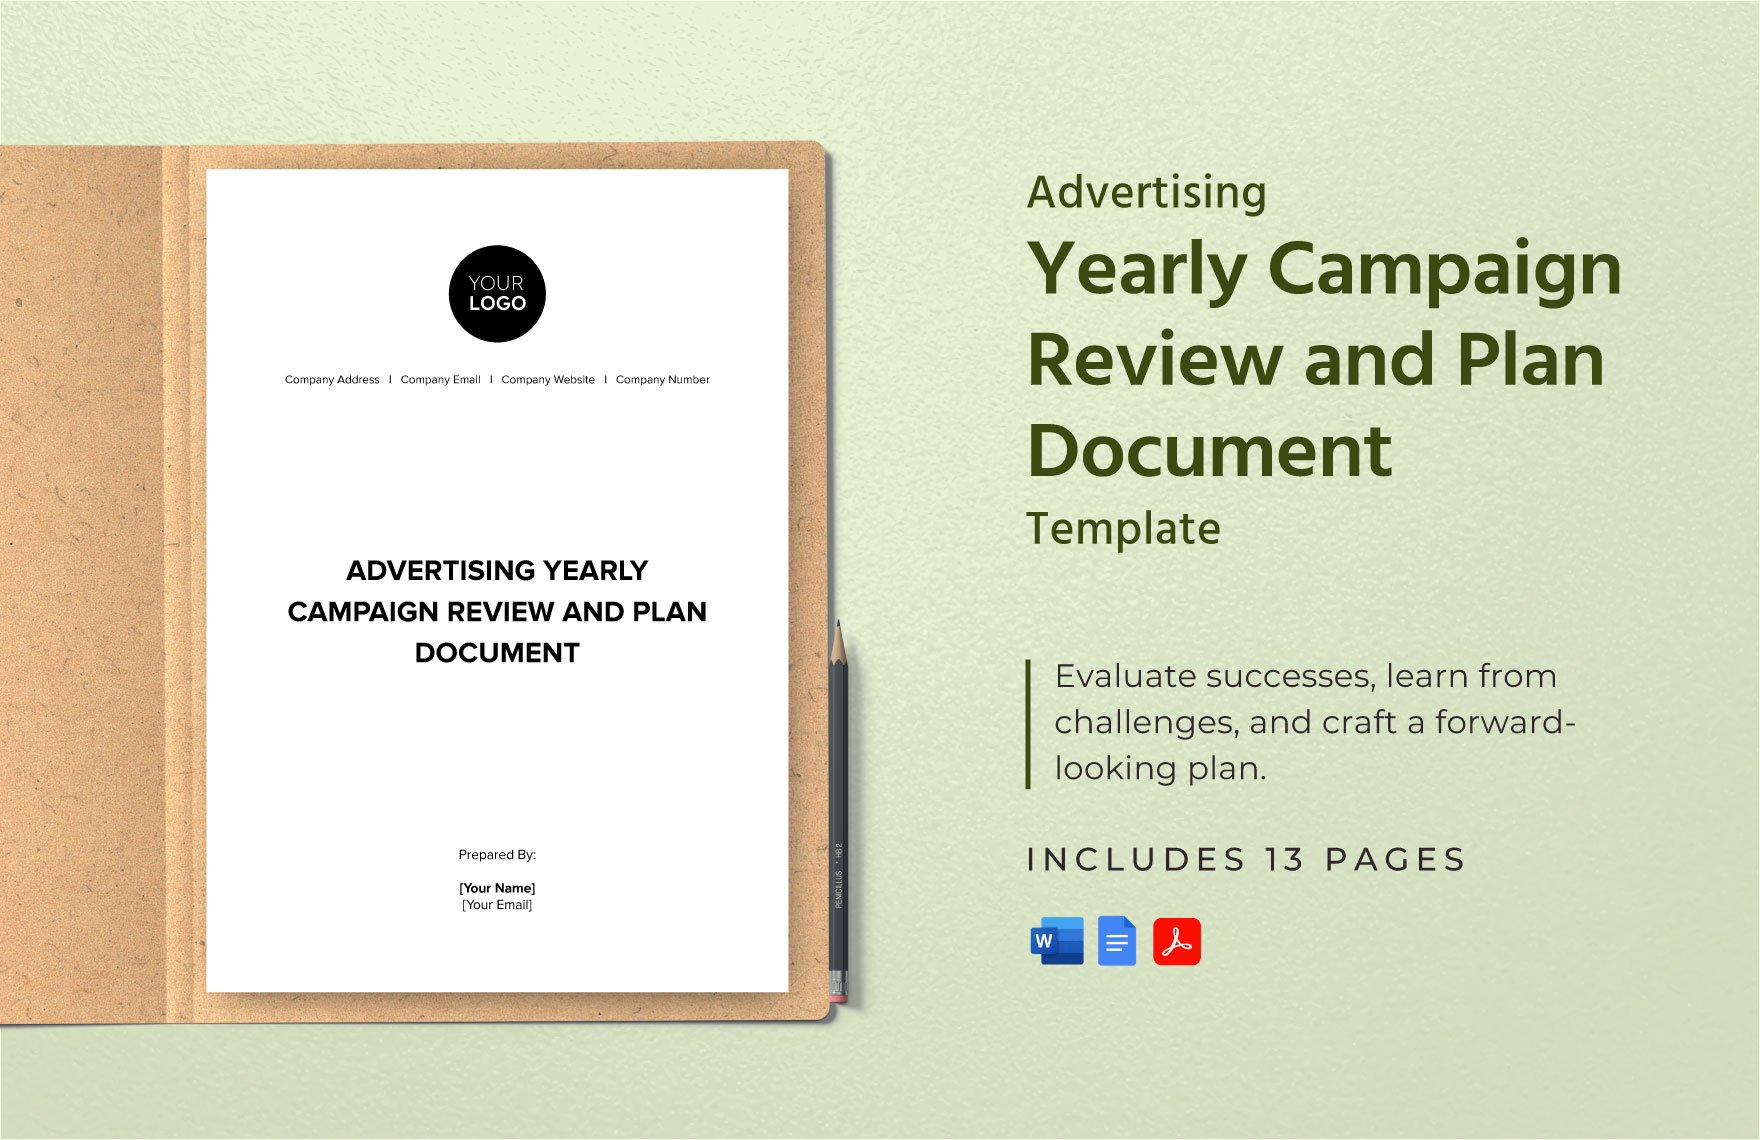 Advertising Yearly Campaign Review and Plan Document Template in Word, Google Docs, PDF